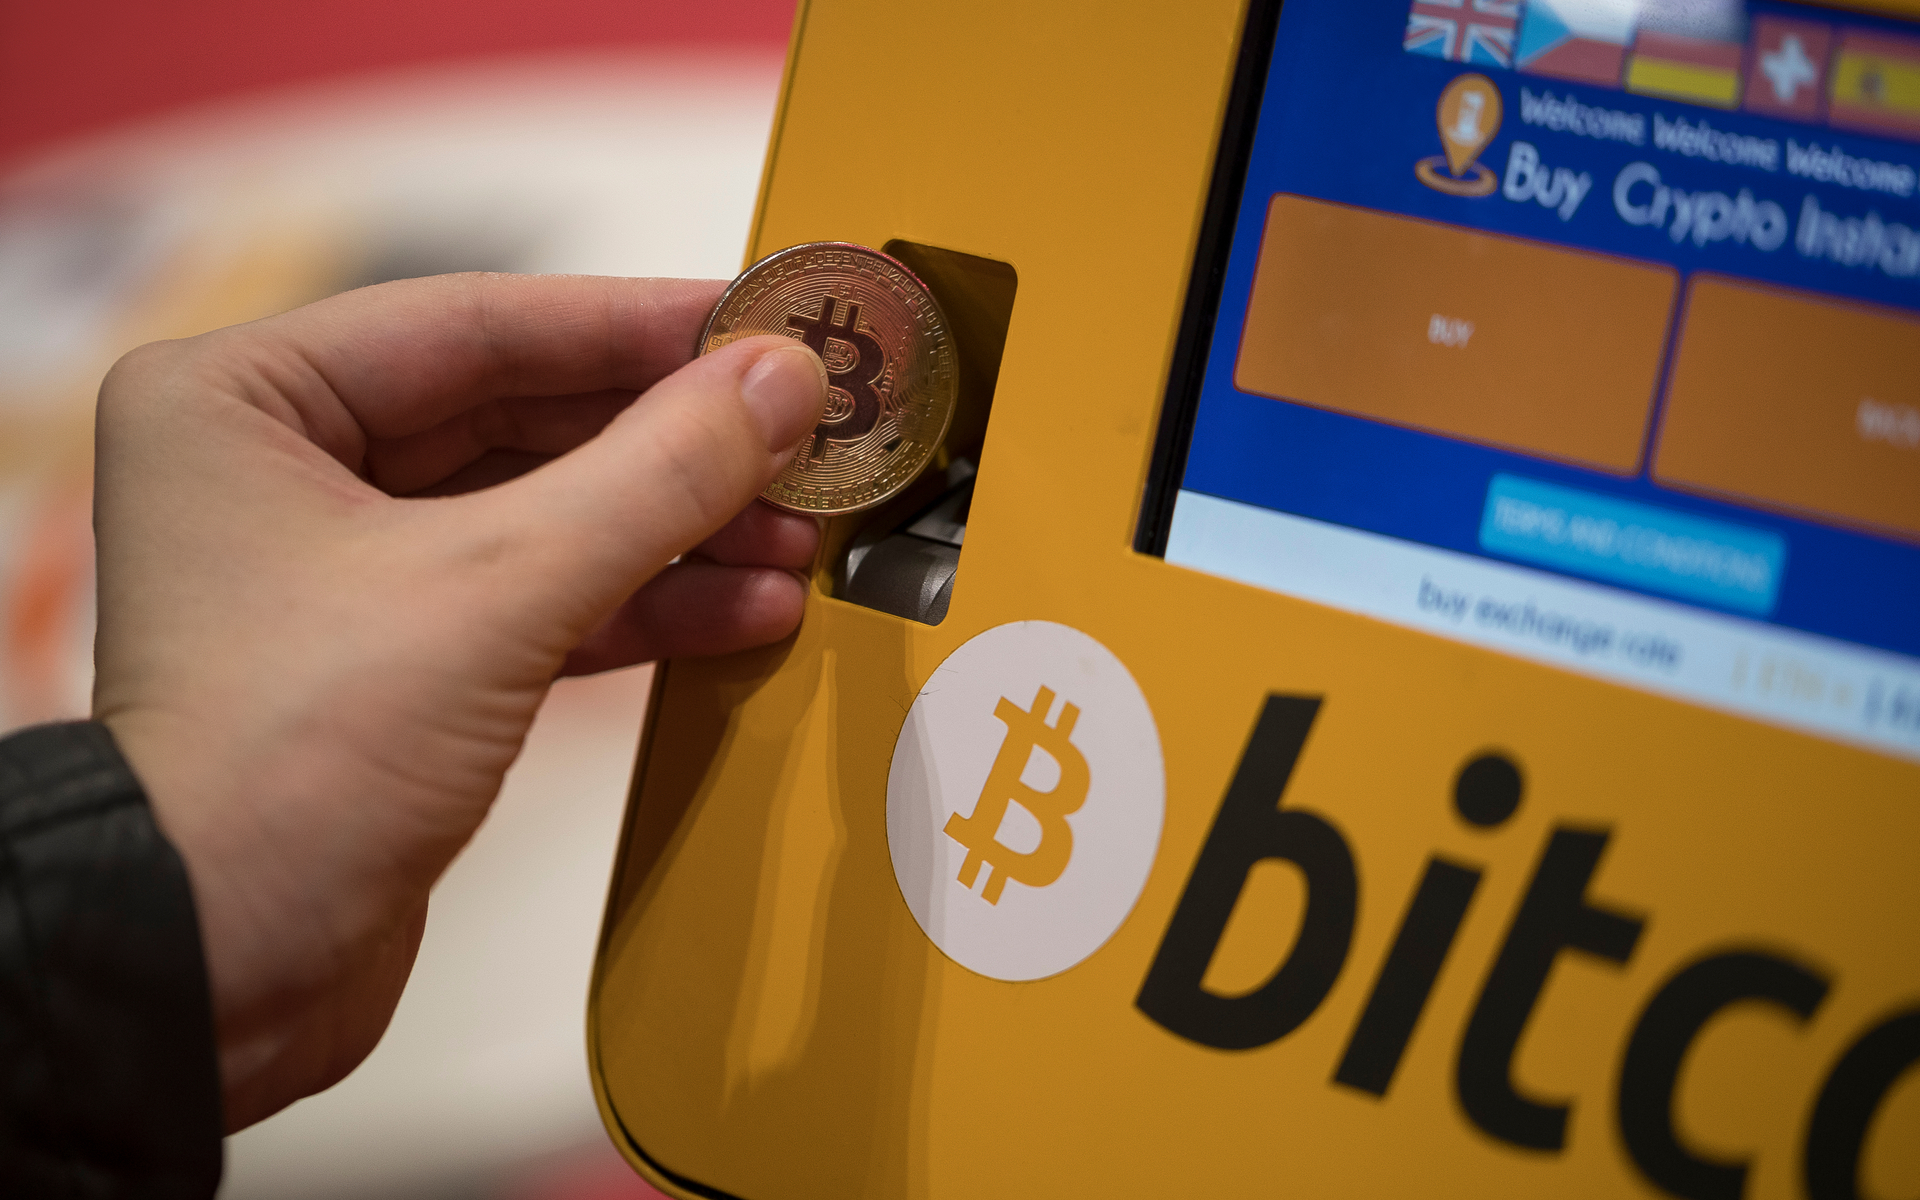 Bitcoin ATM Installations Up 500% Since 2016